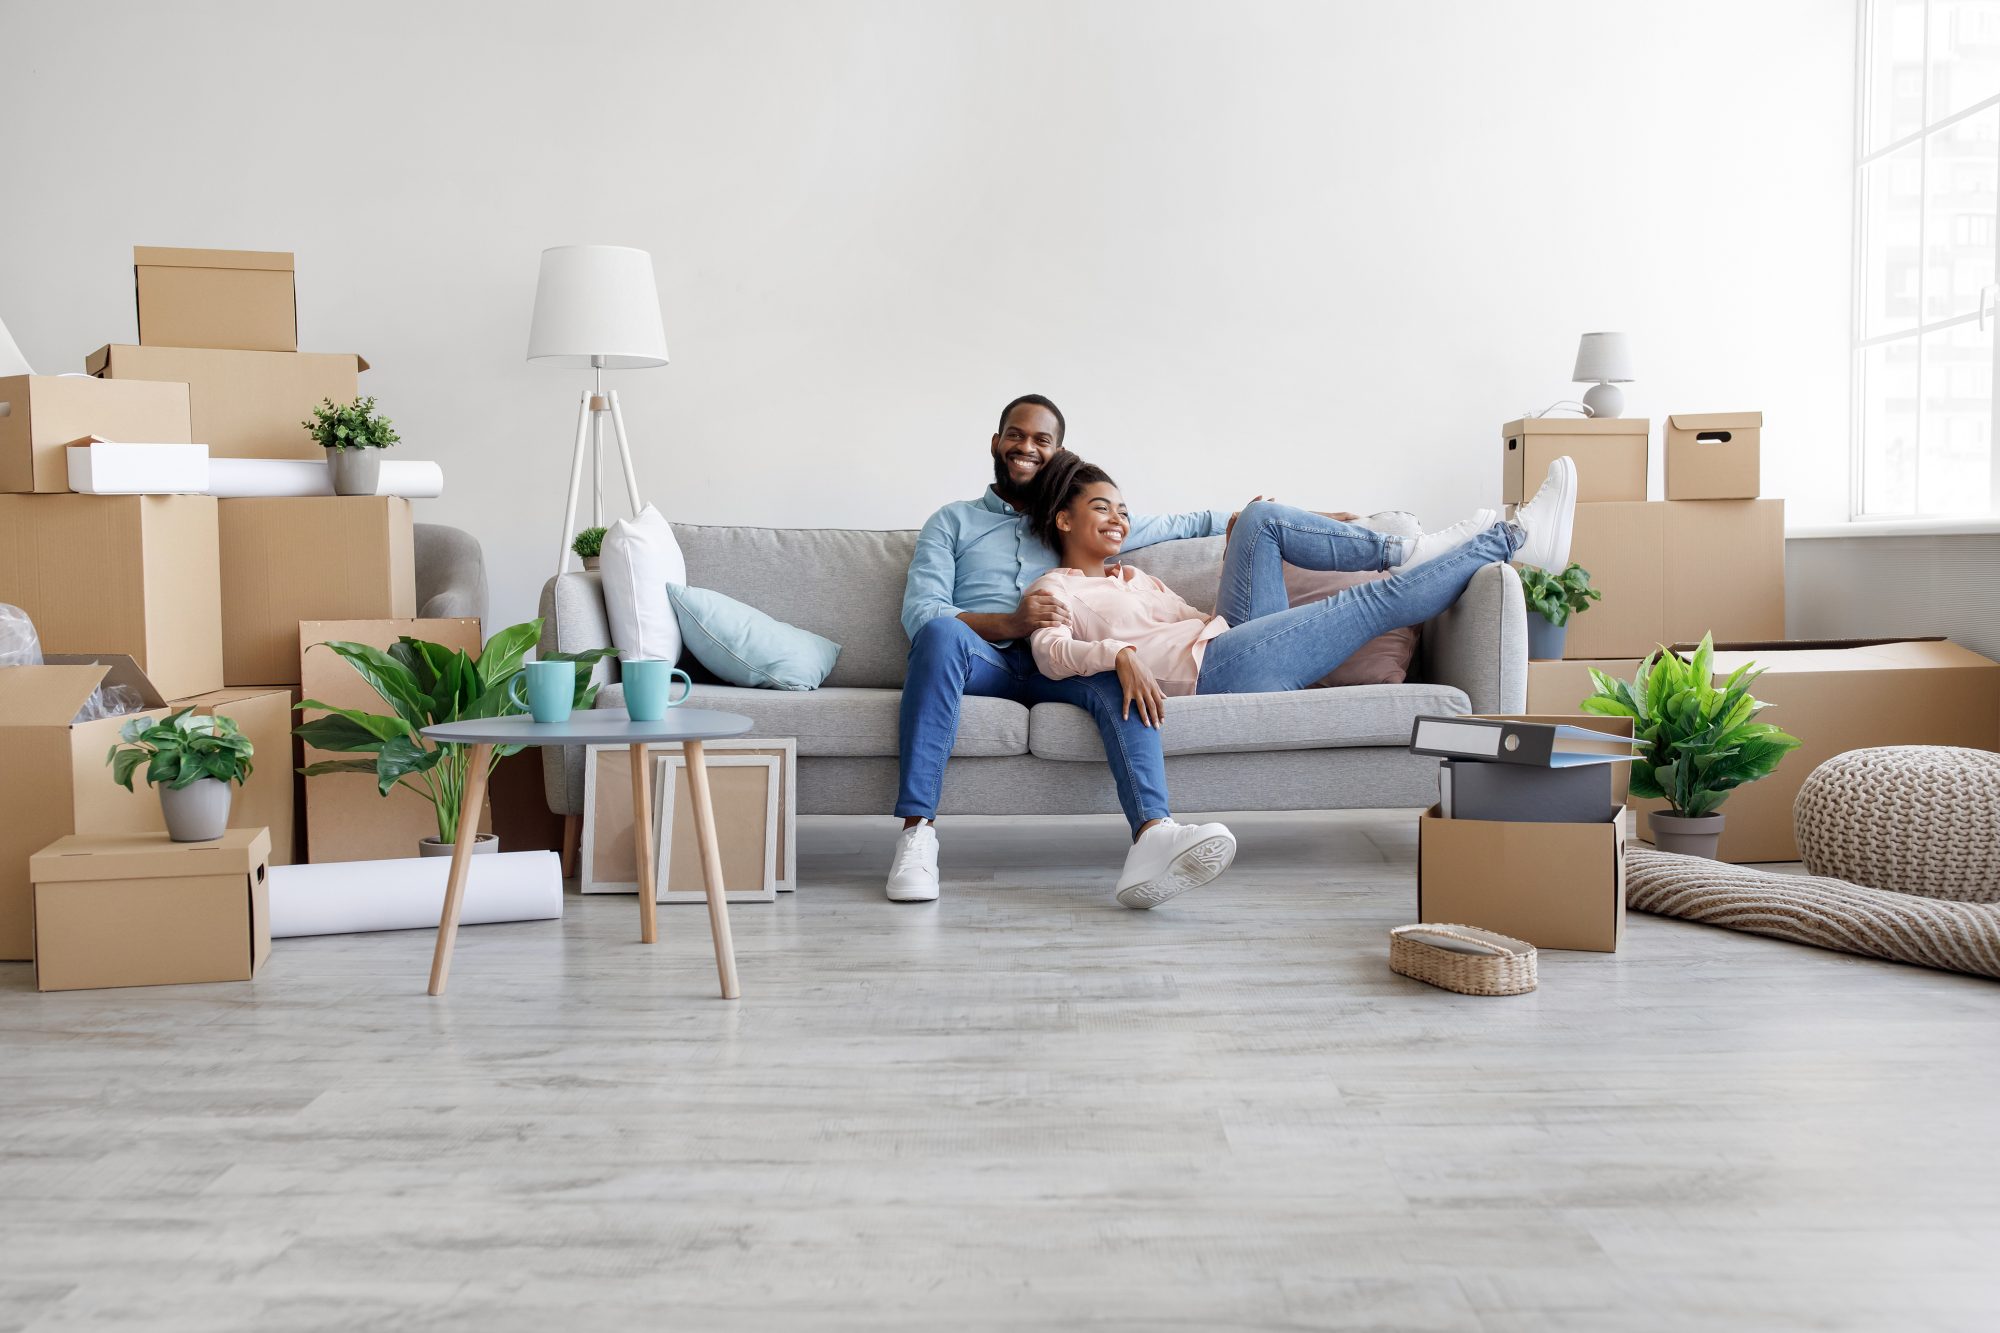 Young couple relaxing on couch in living room surrounded by unpacked moving boxes